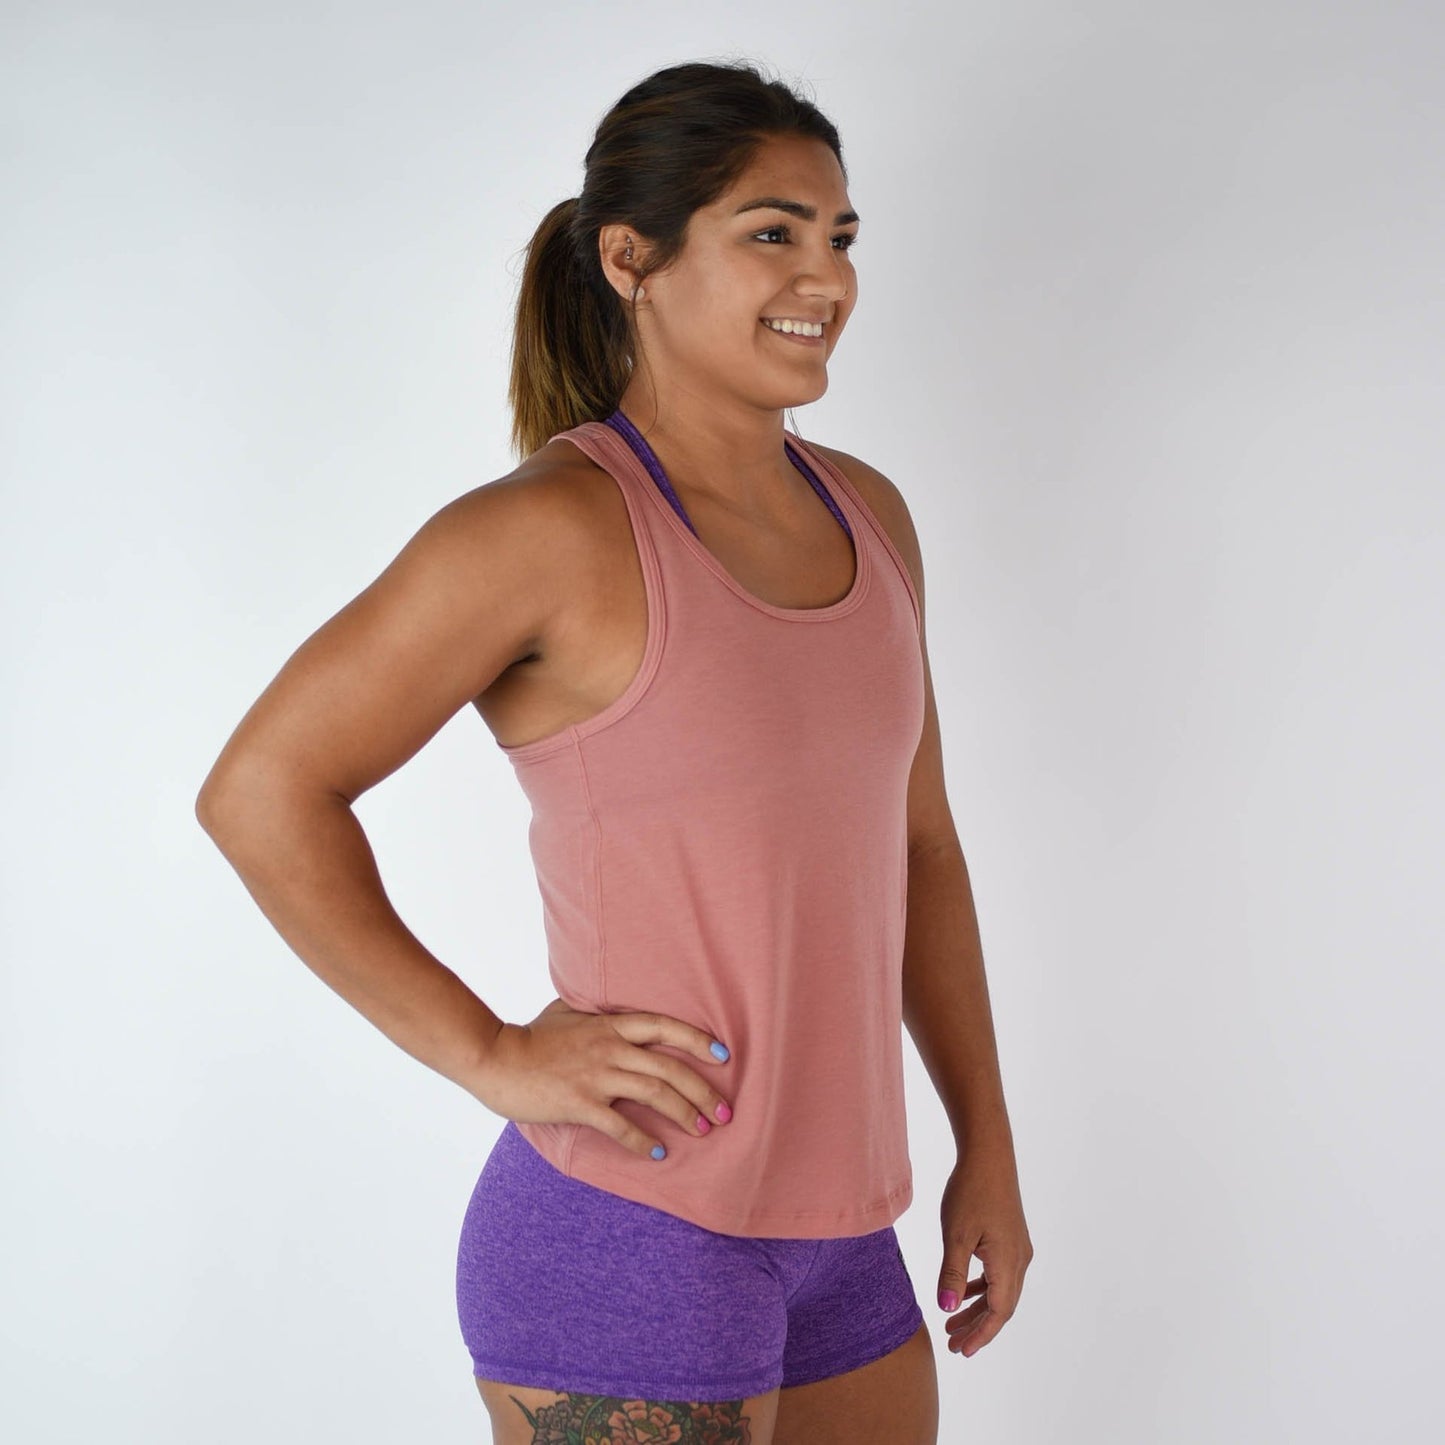 FLEO Elevate Racerback Tank - Withered Rose - 9 for 9